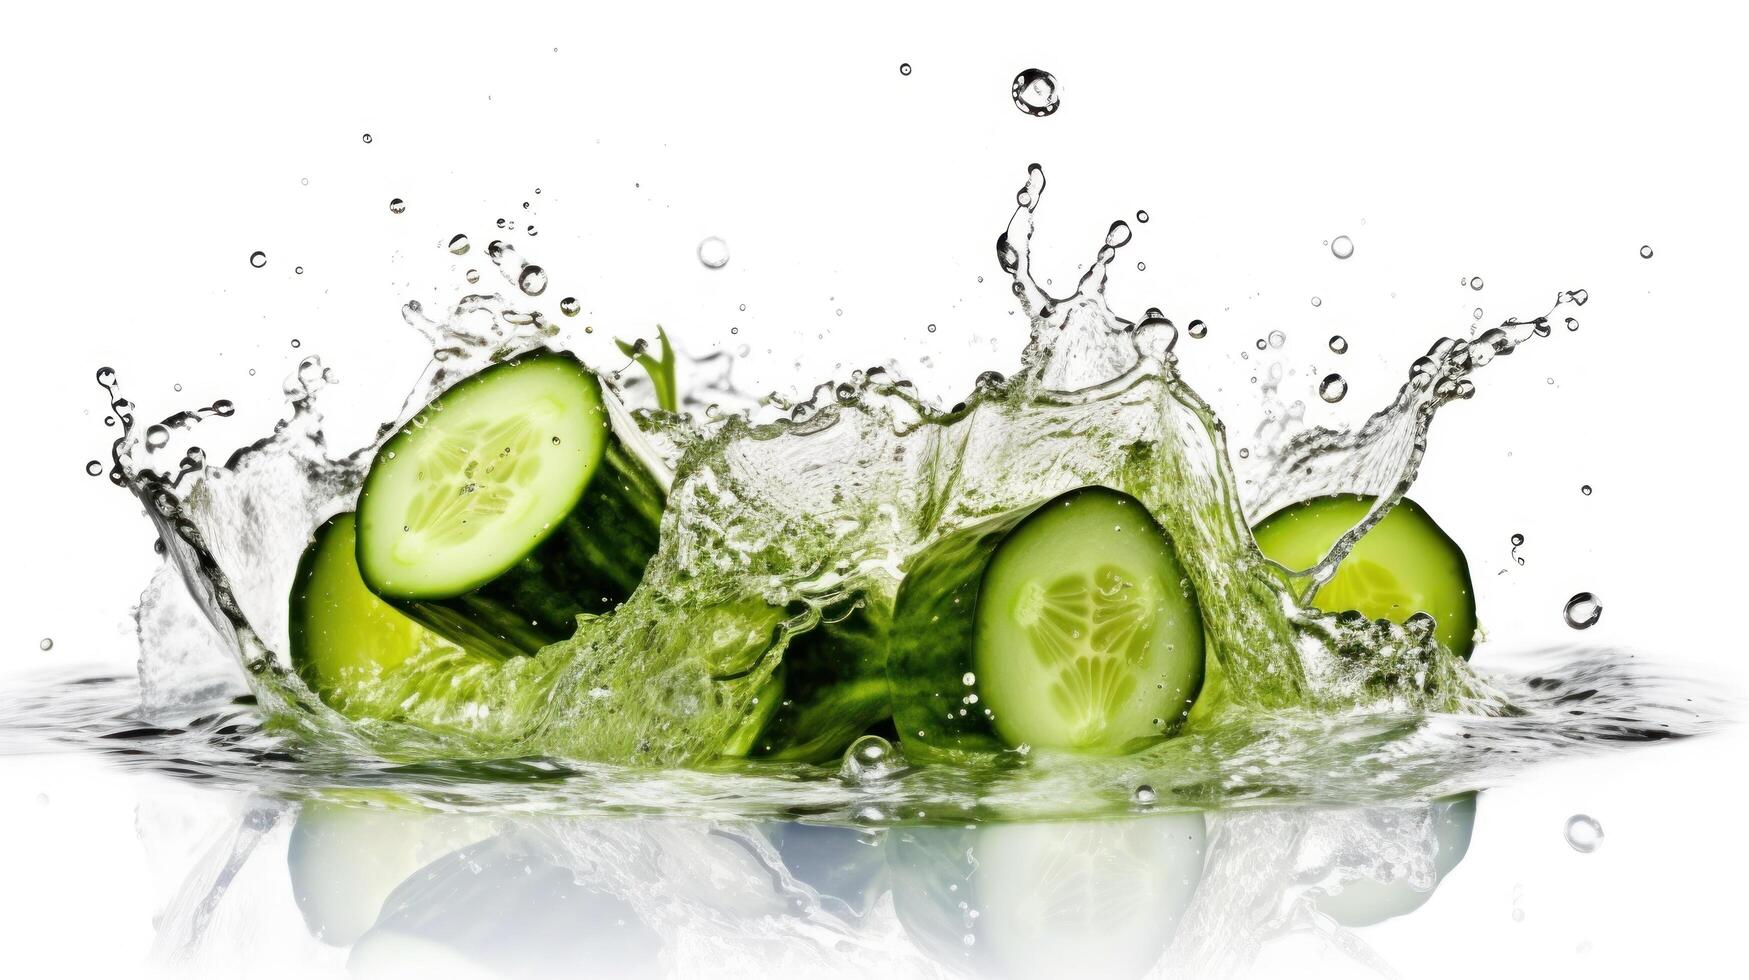 Cucumber in water. Illustration photo